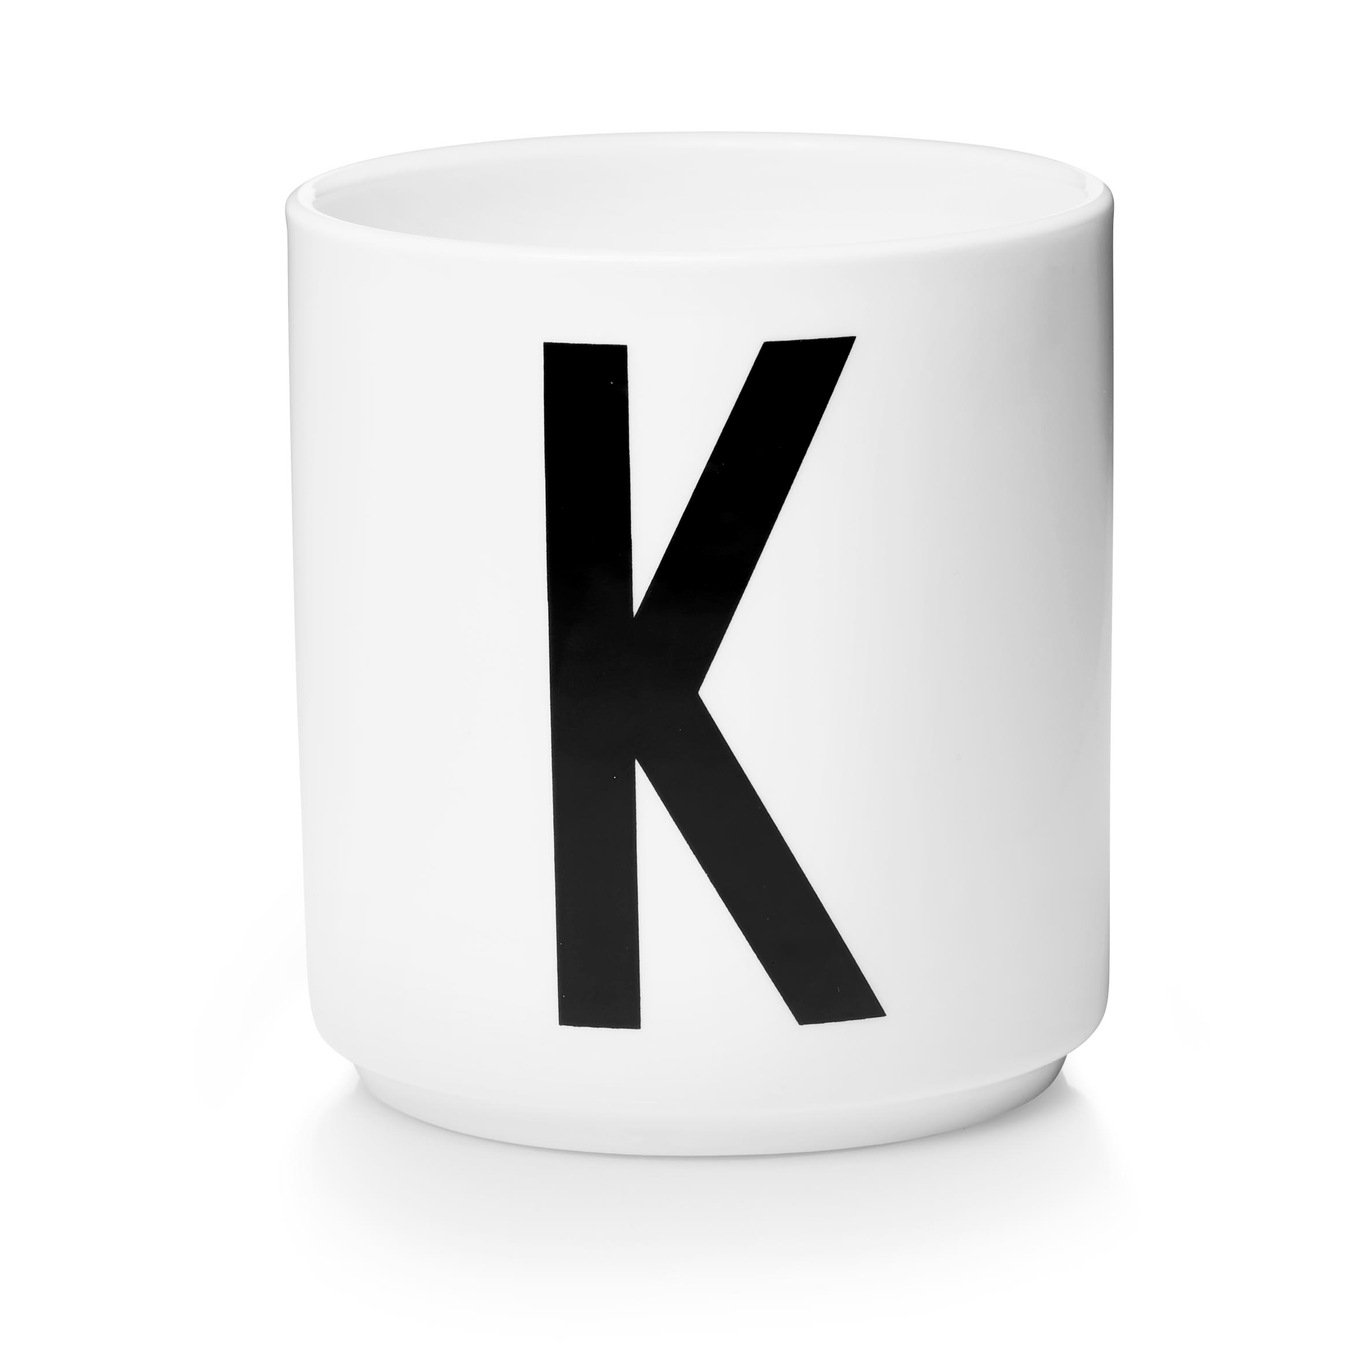 Personal Porcelain Cup White, K